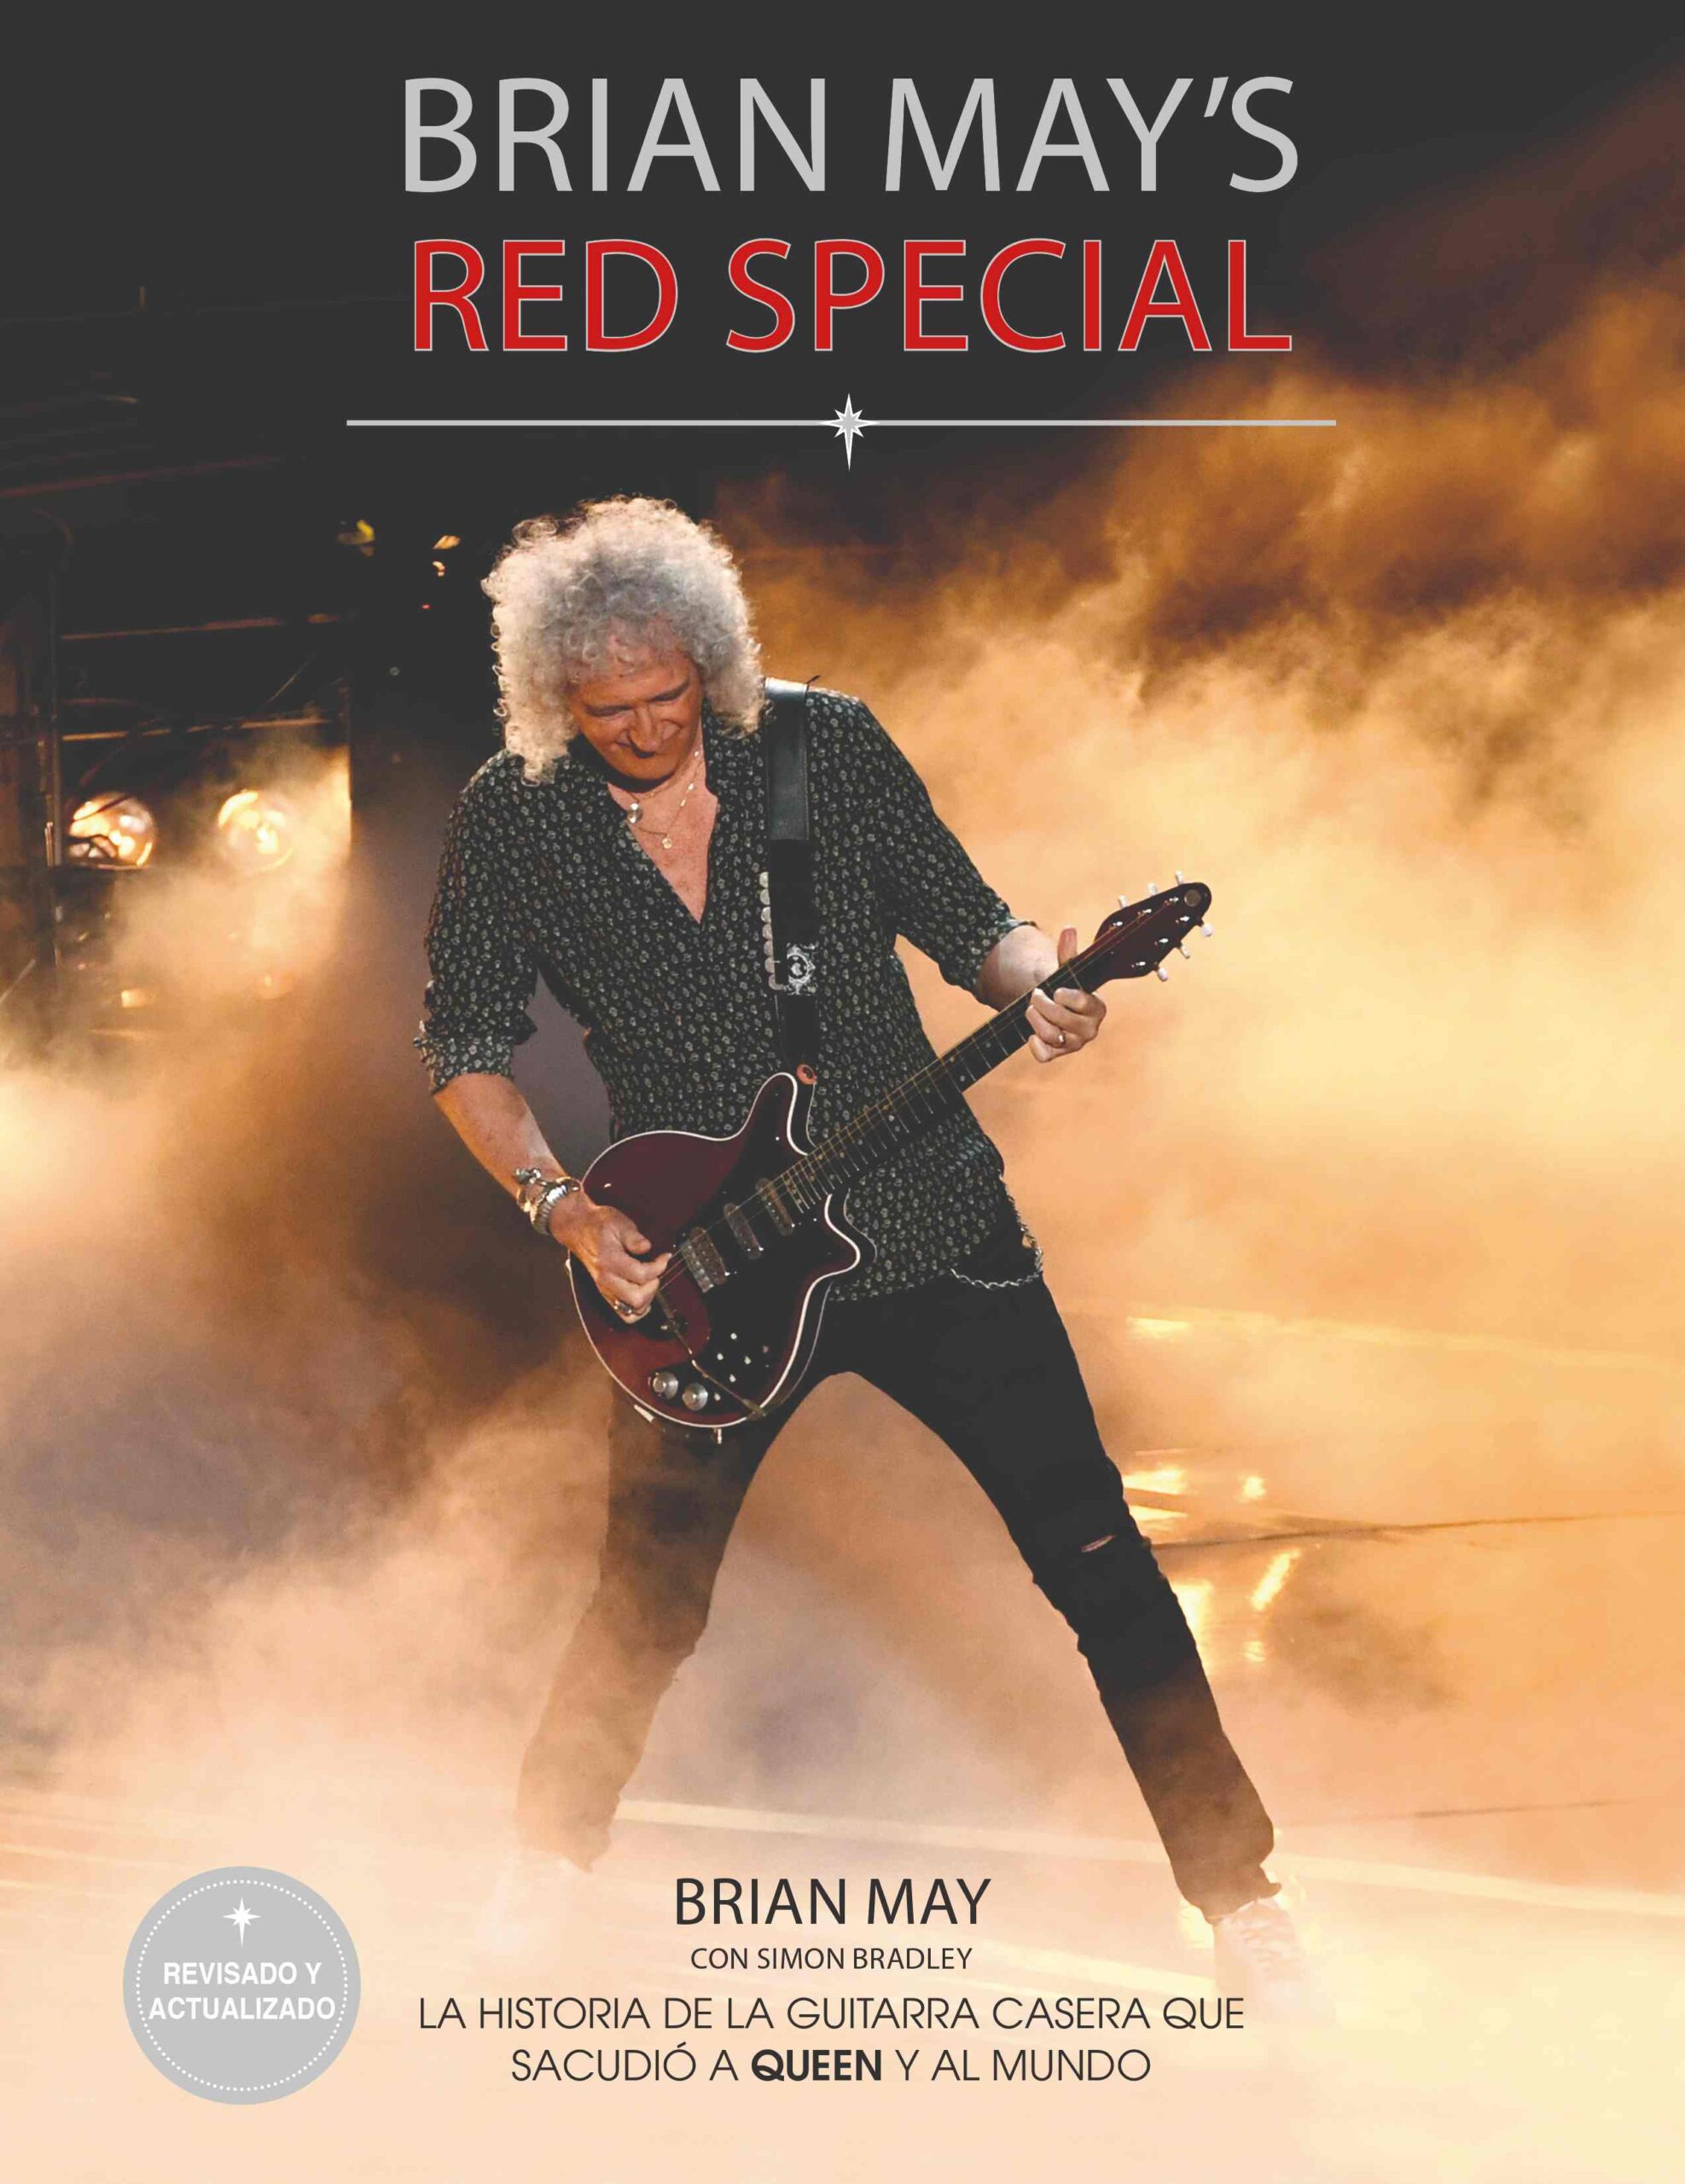 Brian May’s Red Special